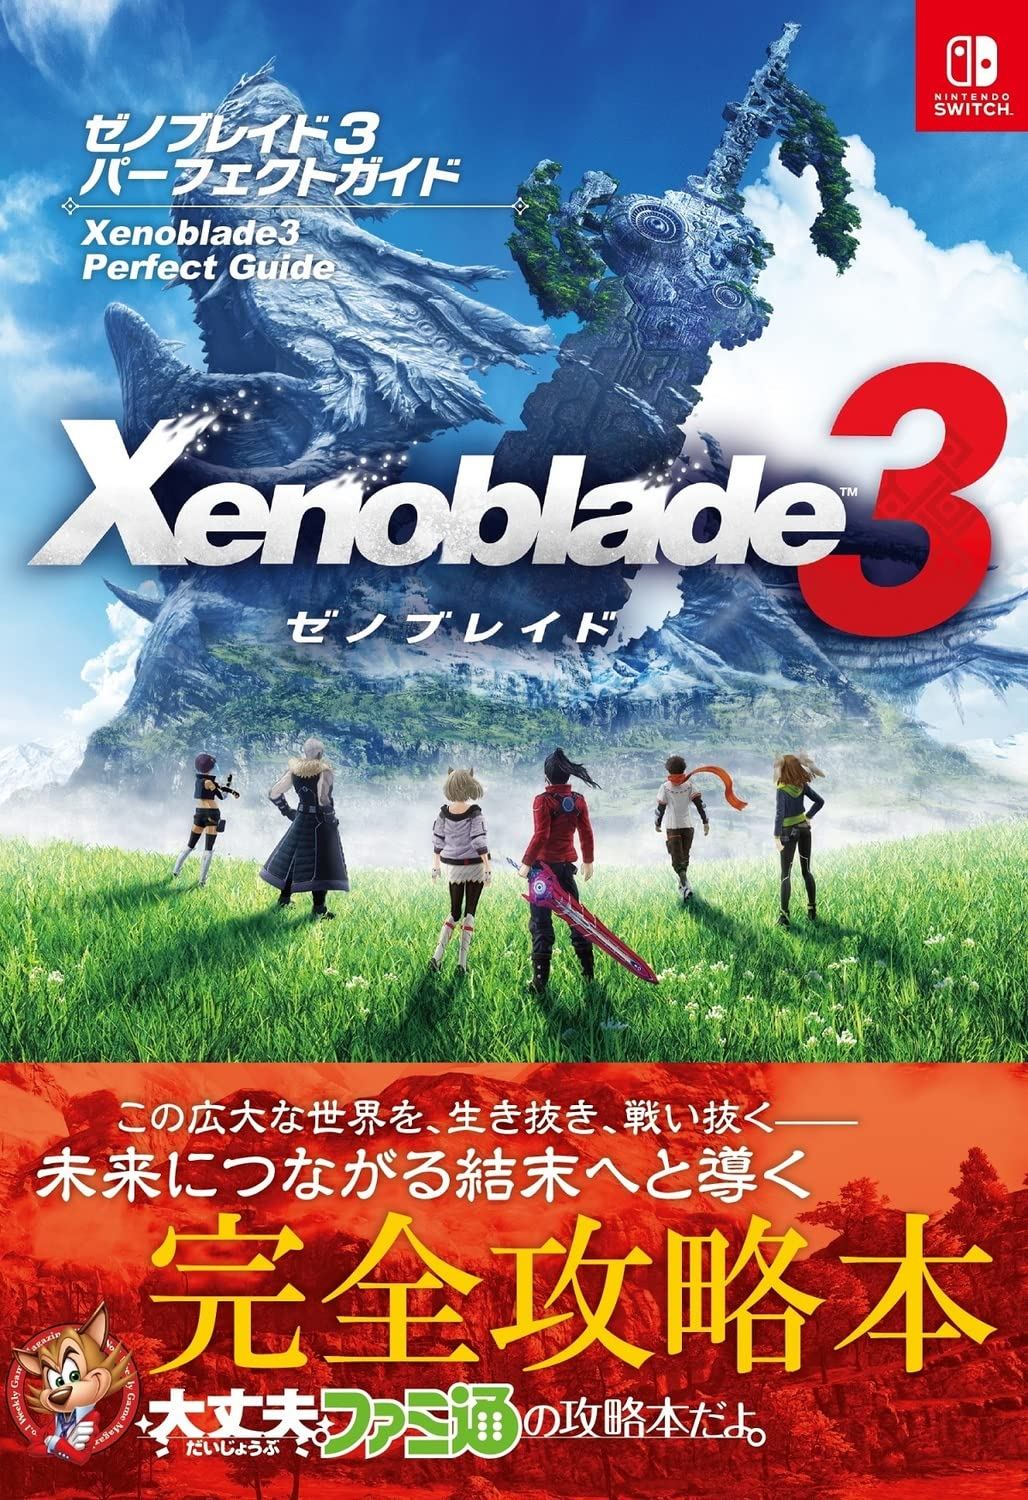 3 Xenoblade Chronicles Perfect Guide